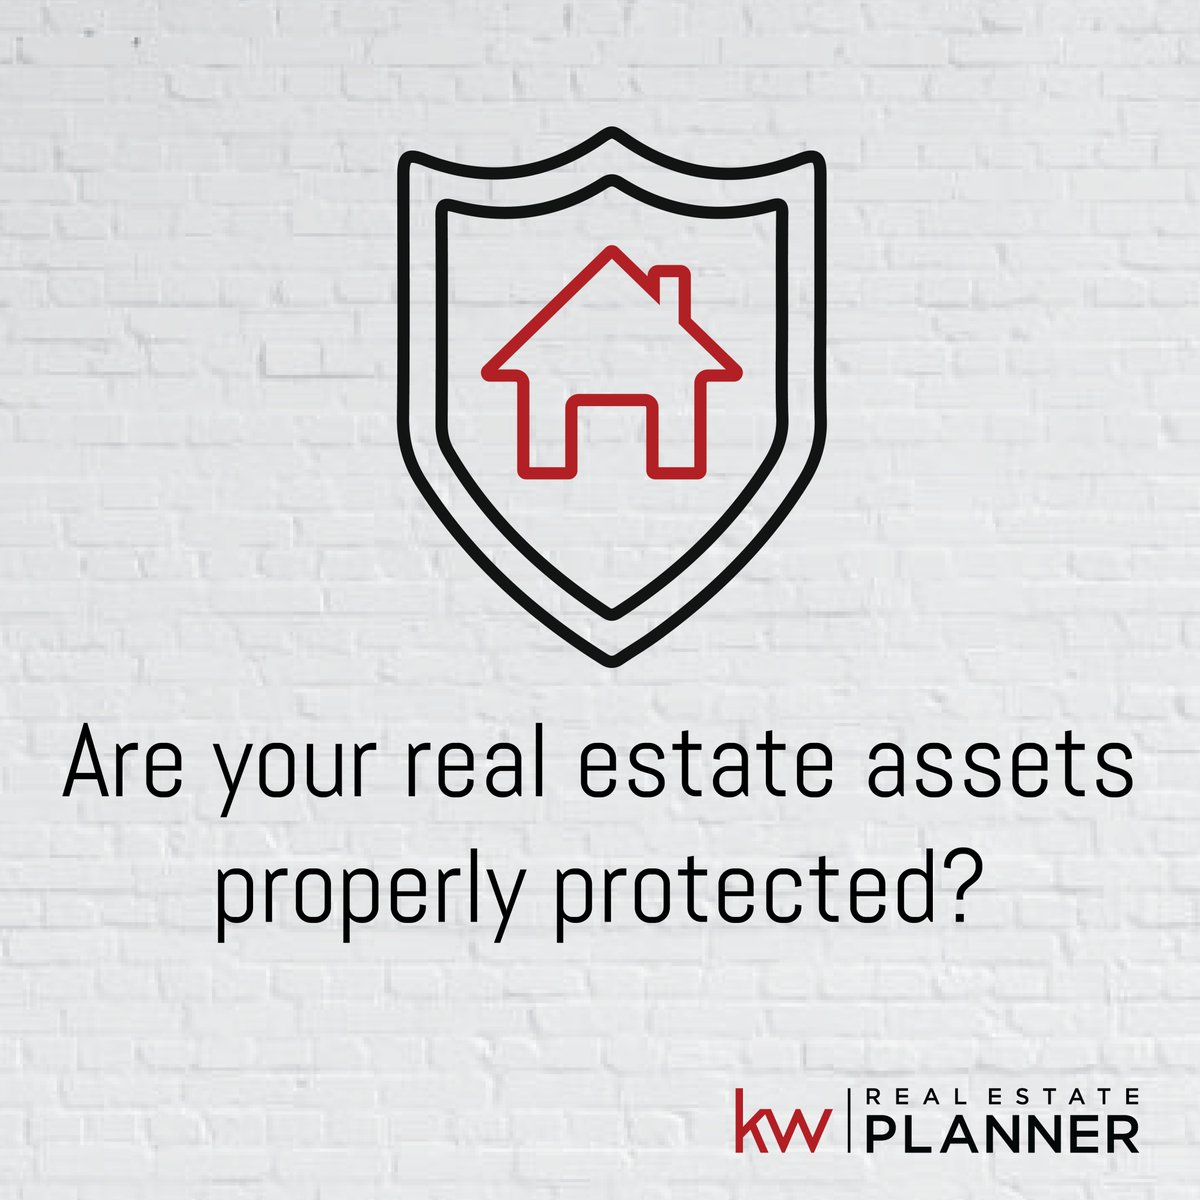 Do you need a real estate planner?
📱Call or text Bill Vernon at 254.495.5661!
#realestateplanner #generationalwealth #assets #realestateassets #wednesday #wednesdaywisdom #realtorlife #planning #realestateagency #centraltexas #texashomes #kwagents #kwrealty #i35group